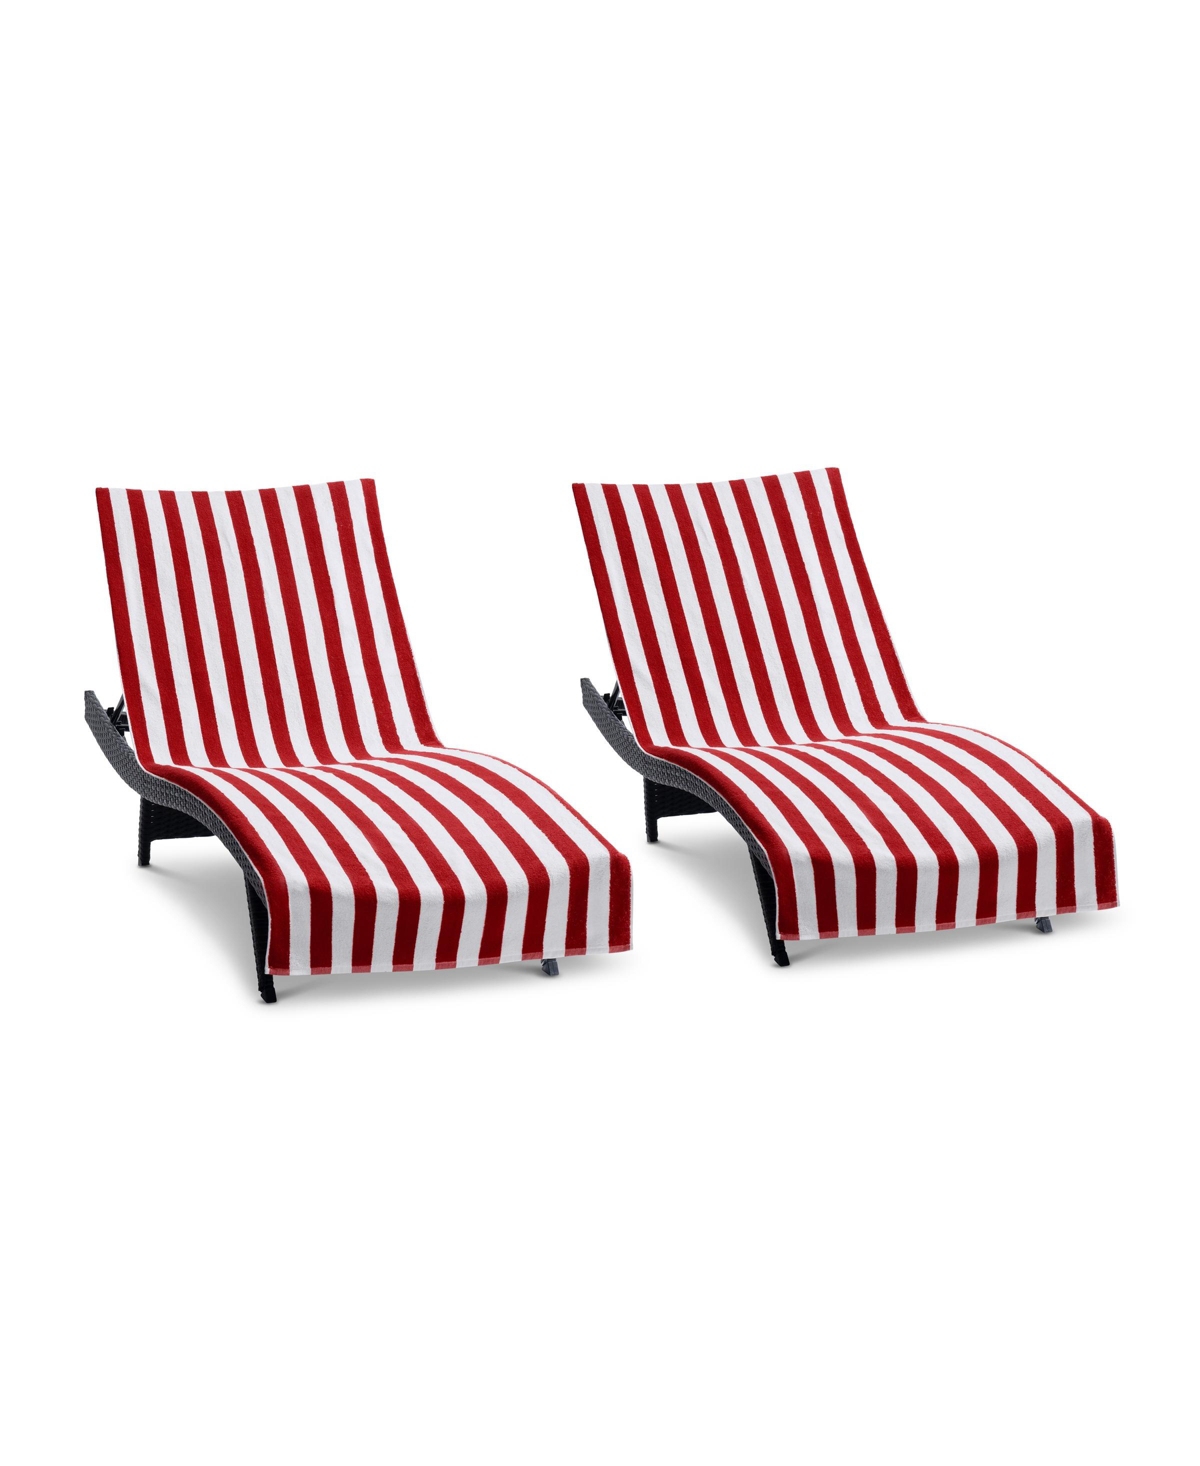 California Cabana Chaise Lounge Covers (2 Pack), Striped Color Options, 30x85 in. with 8" Fitted Pocket for Beach or Pool Chair - Beige